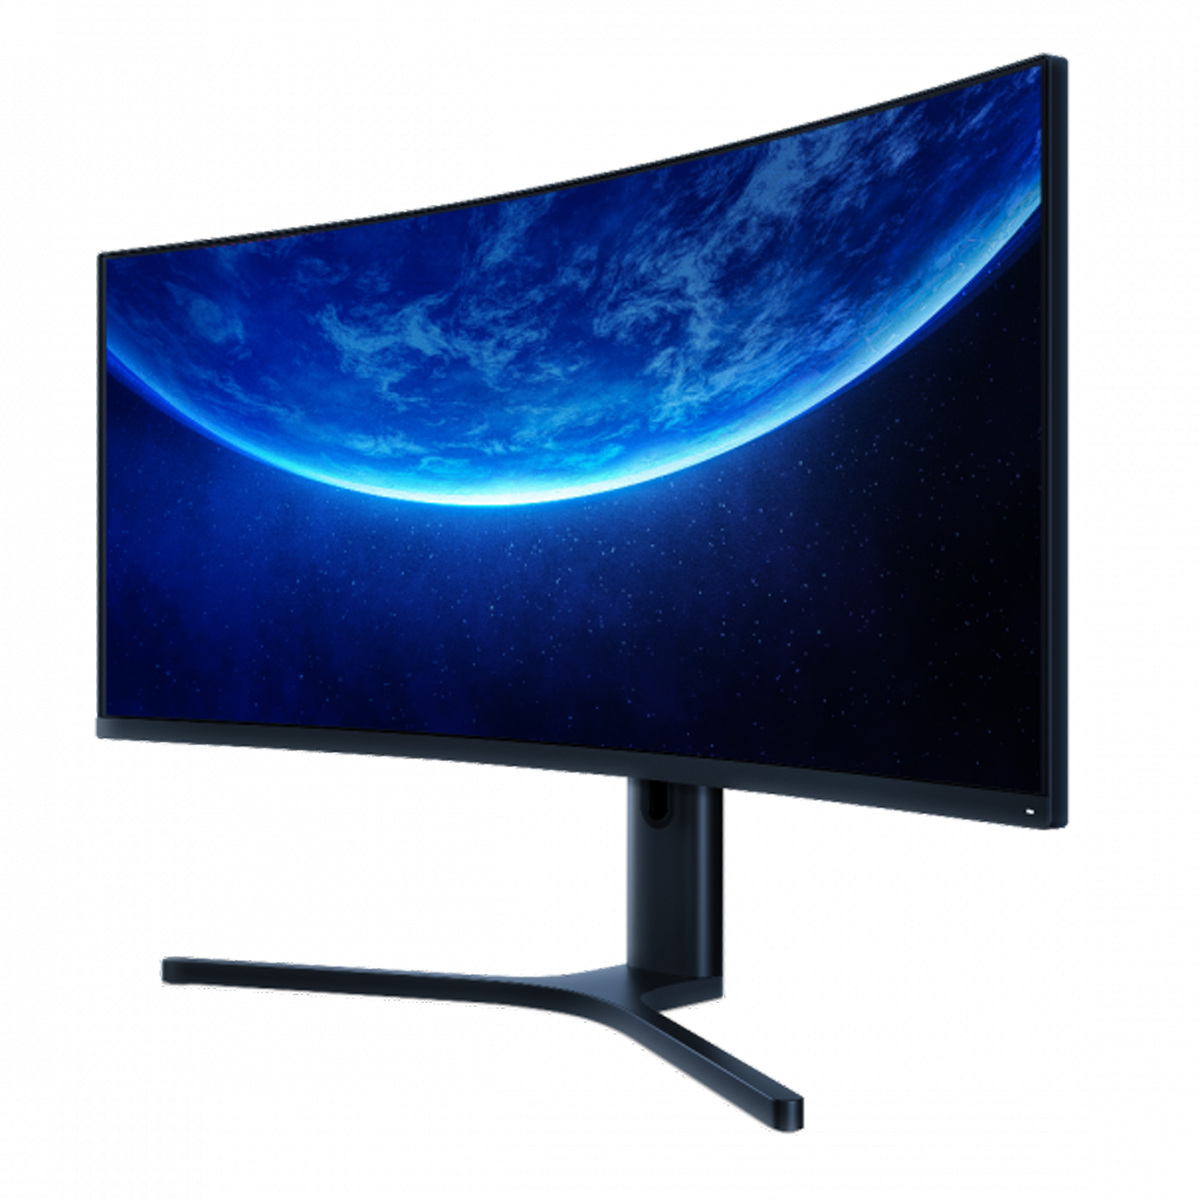 Mi Curved Gaming Monitor BHR5117HK 30"